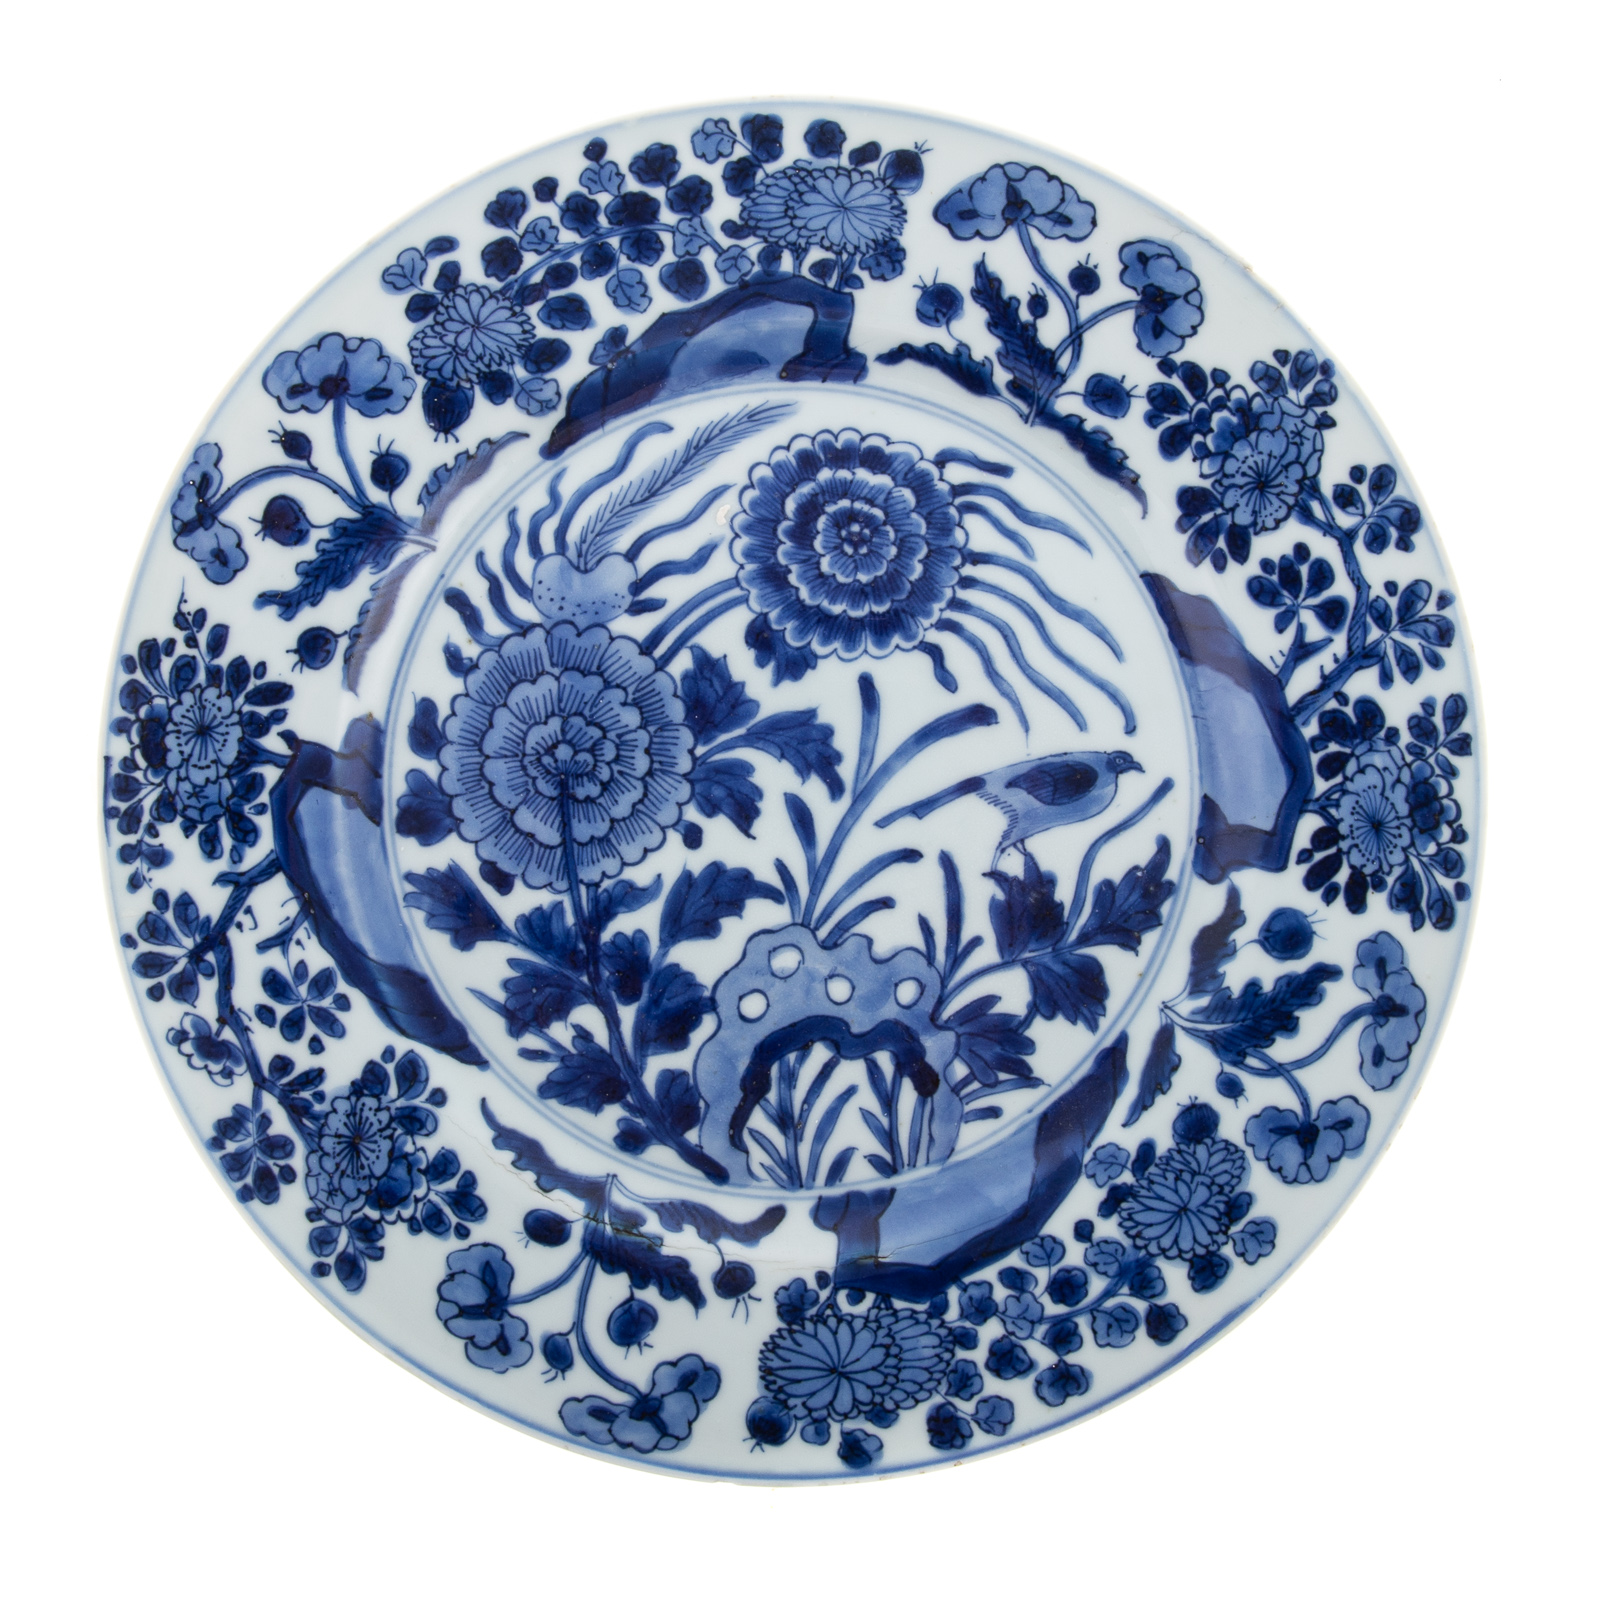 CHINESE EXPORT BLUE WHITE PLATE 29ded8